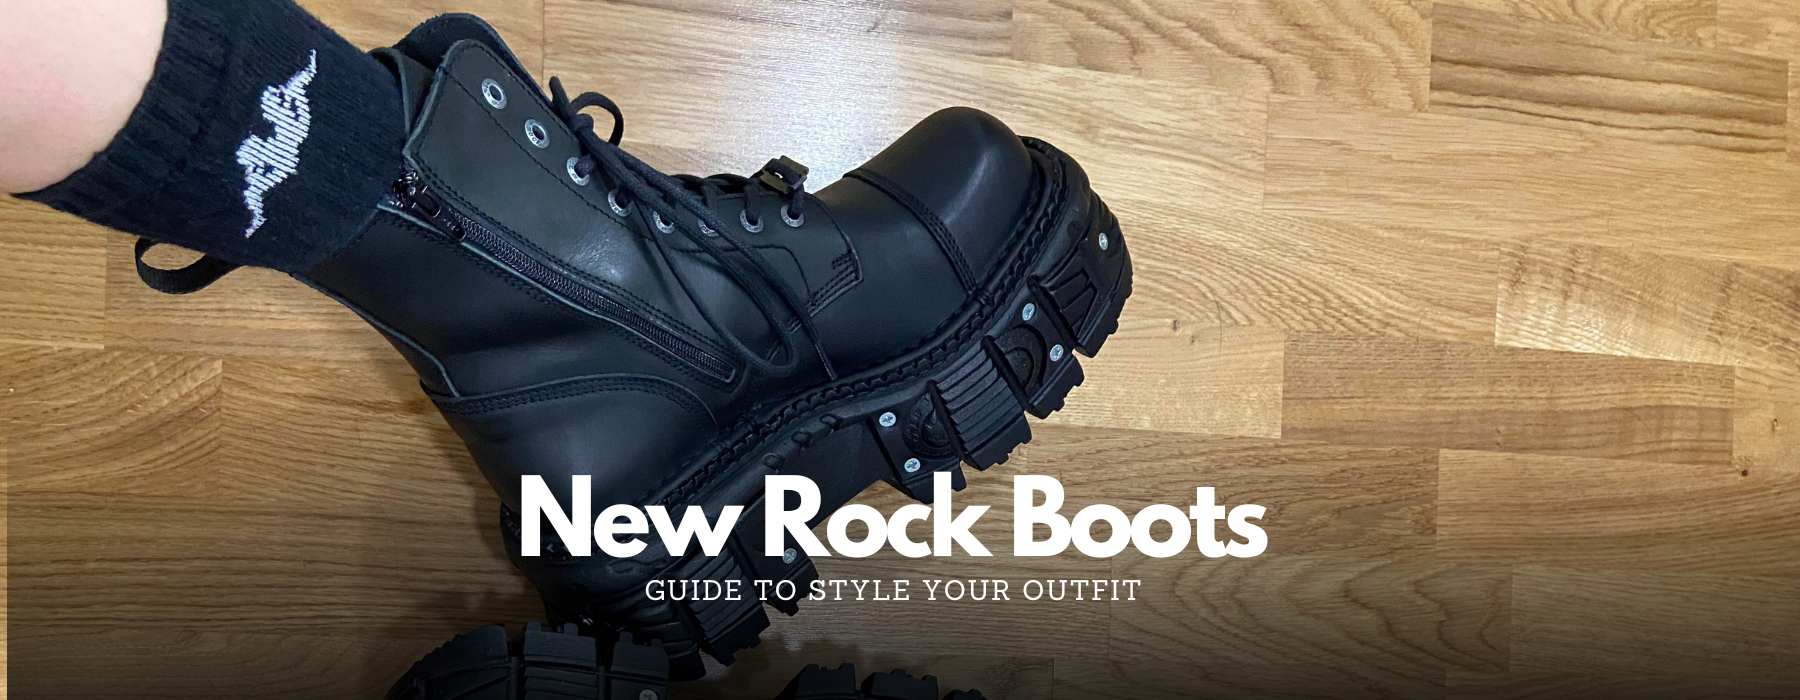 Guide to style your outfit with New Rock Boots - Upperclass Fashions 